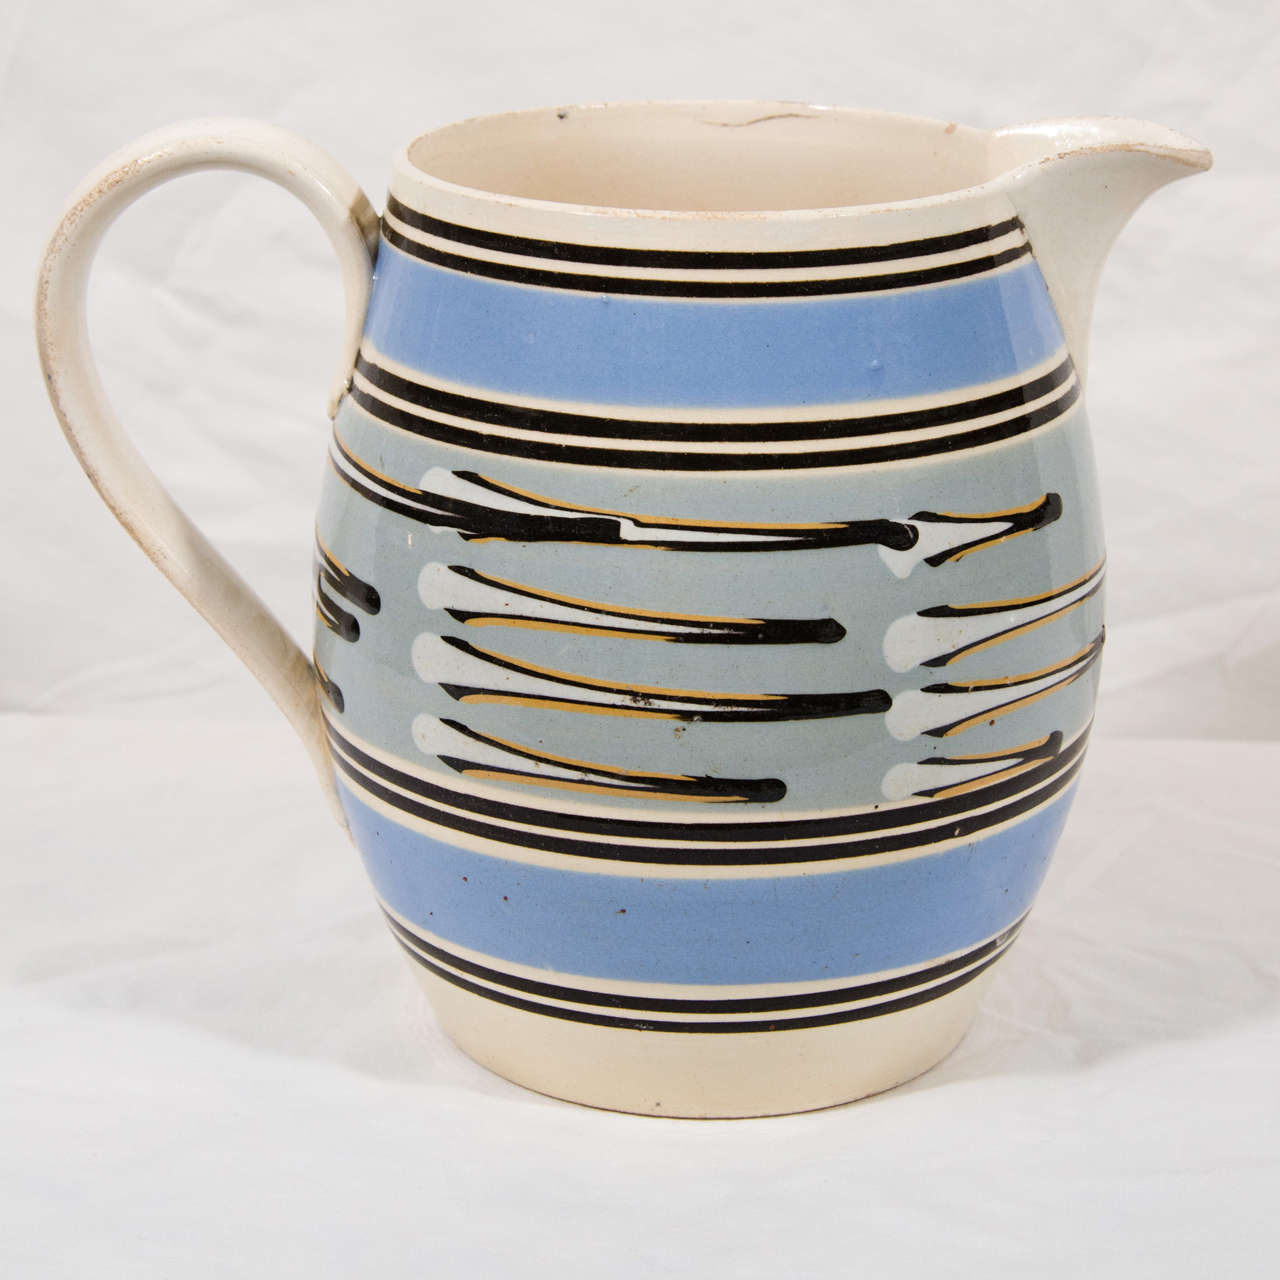 A slip covered, machine turned Mocha jug with broad bands of light blue and thin lines of black at the top and bottom. The center with slip cup decoration in white, black and orange on a light blue gray ground.
For an almost identical jug with